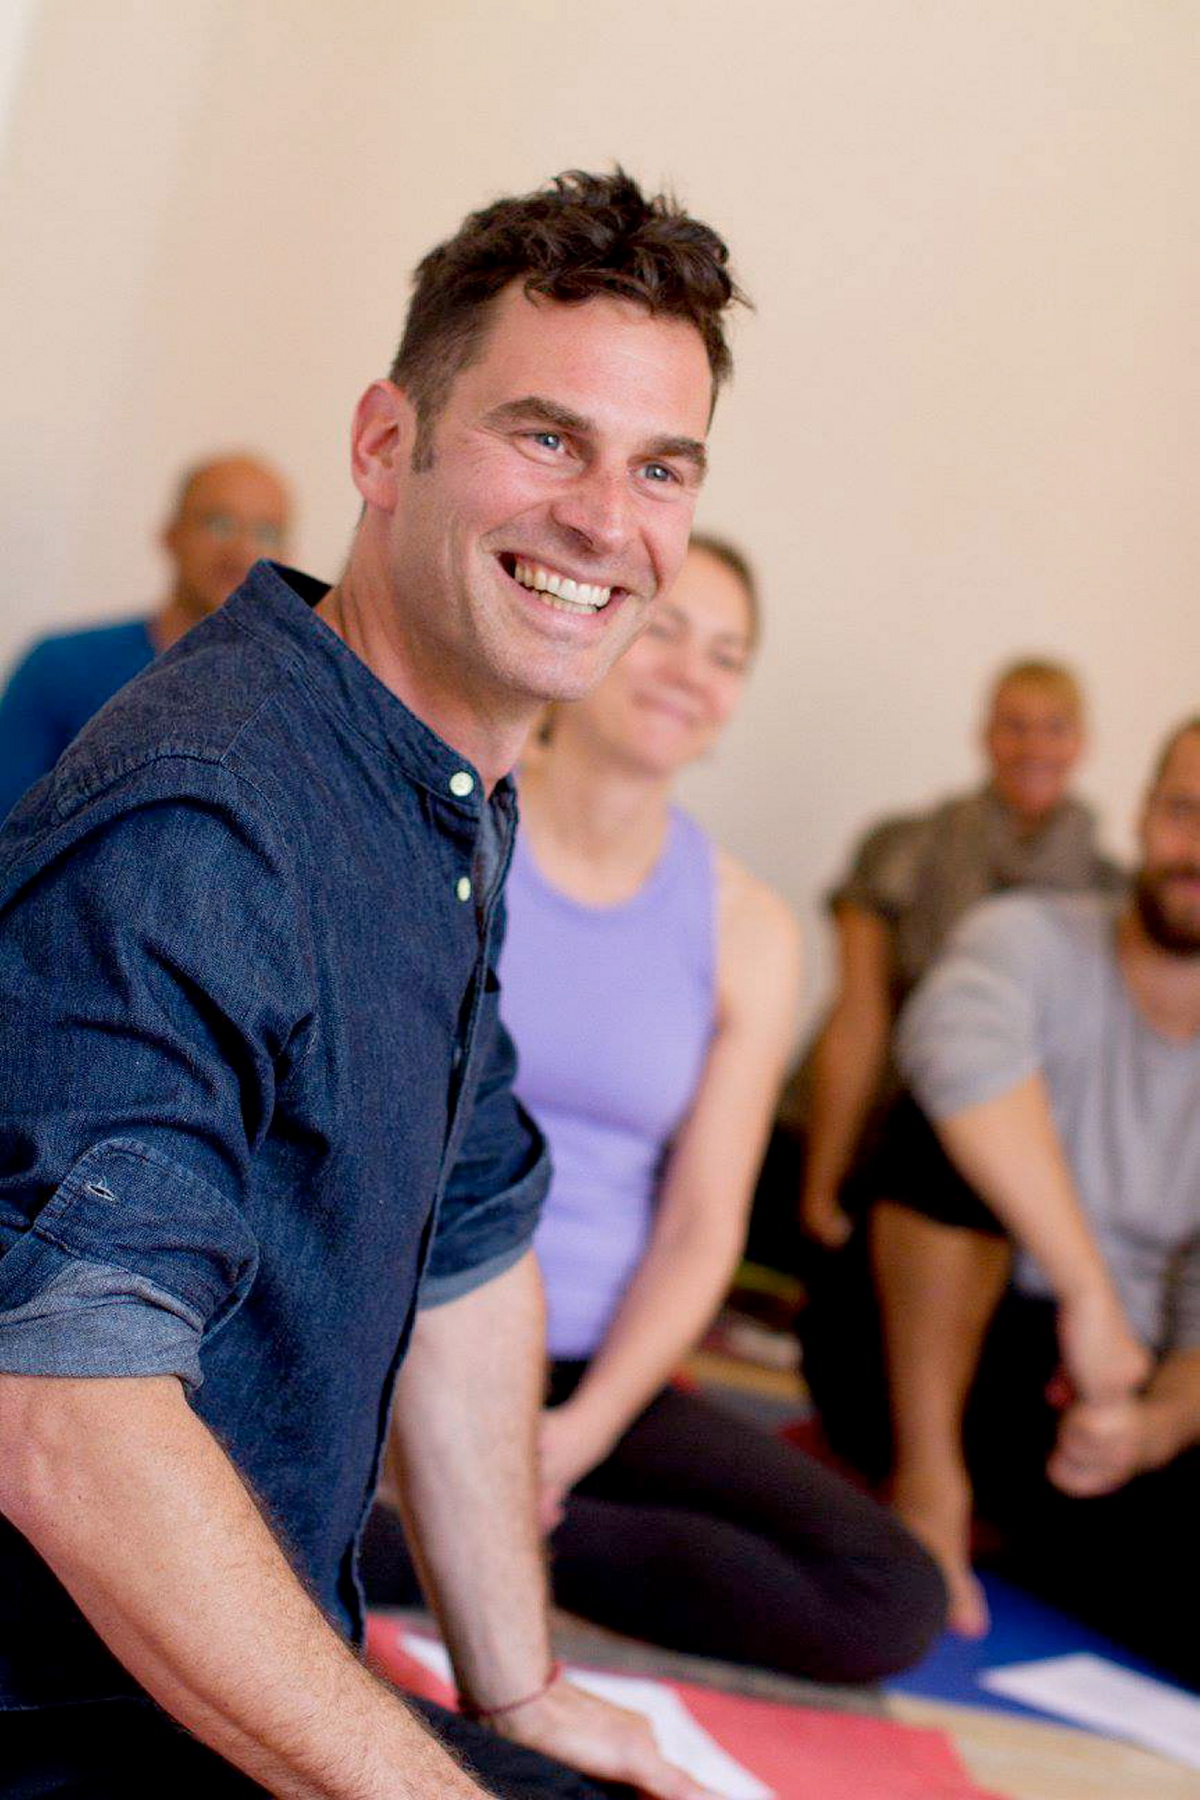 Yoga innovator, author dies in Victoria at 42 - Victoria Times